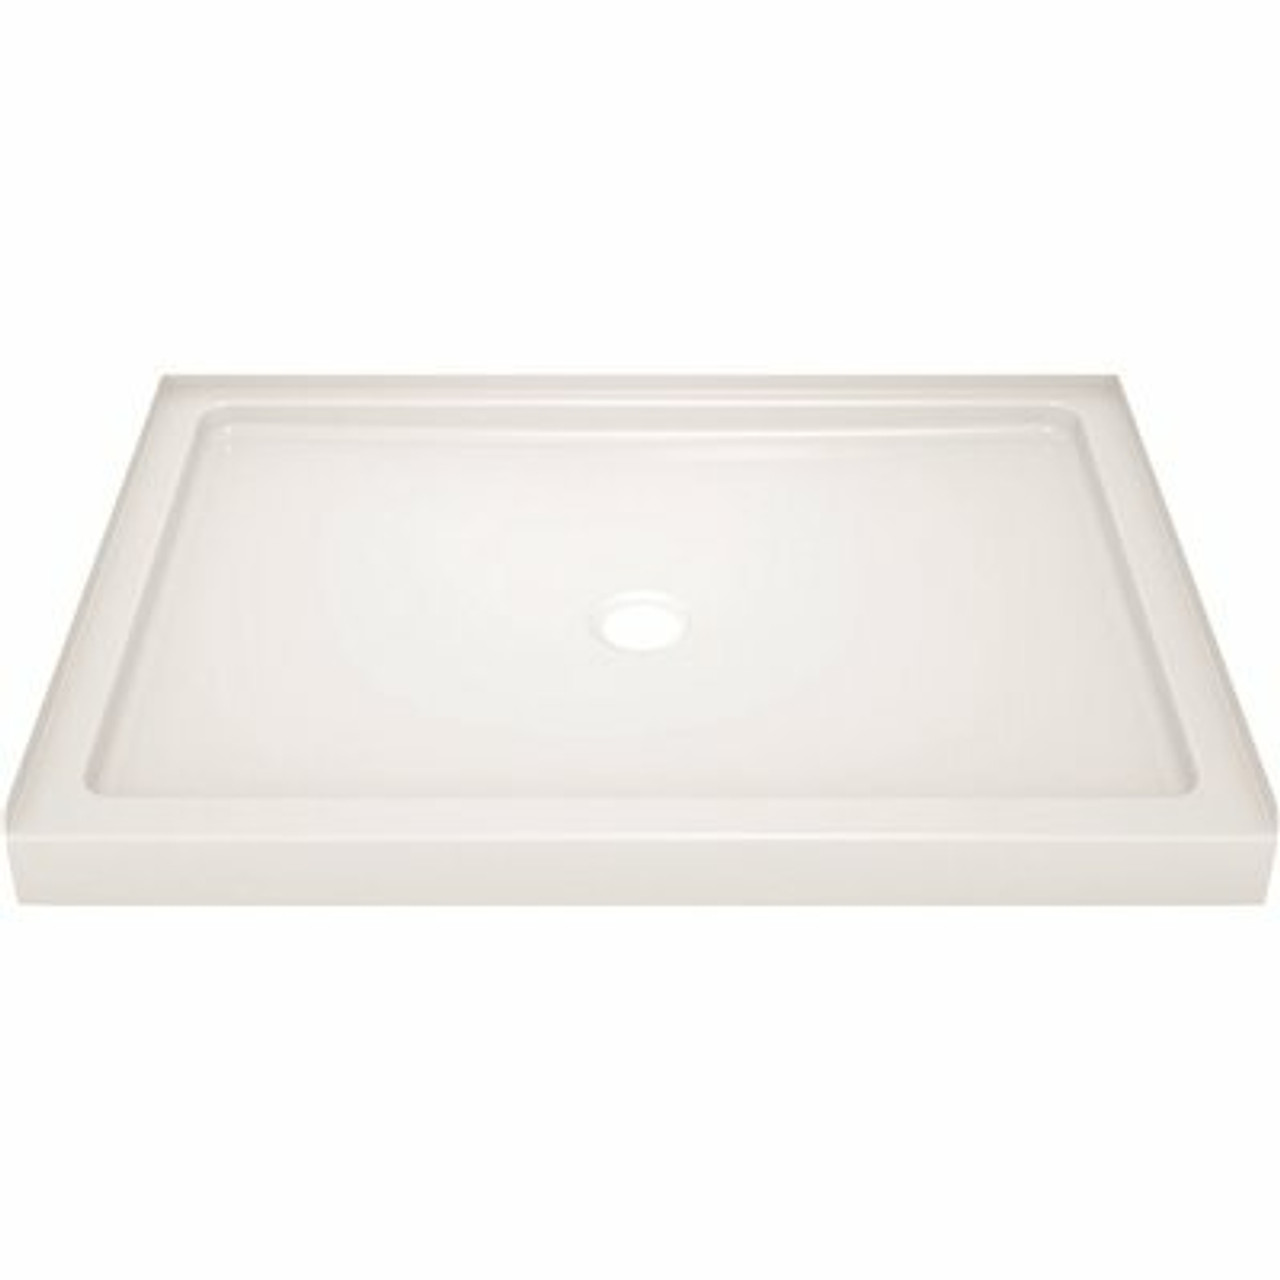 Delta Classic 400 48 In. L X 34 In. W Alcove Shower Pan Base With Center Drain In High Gloss White